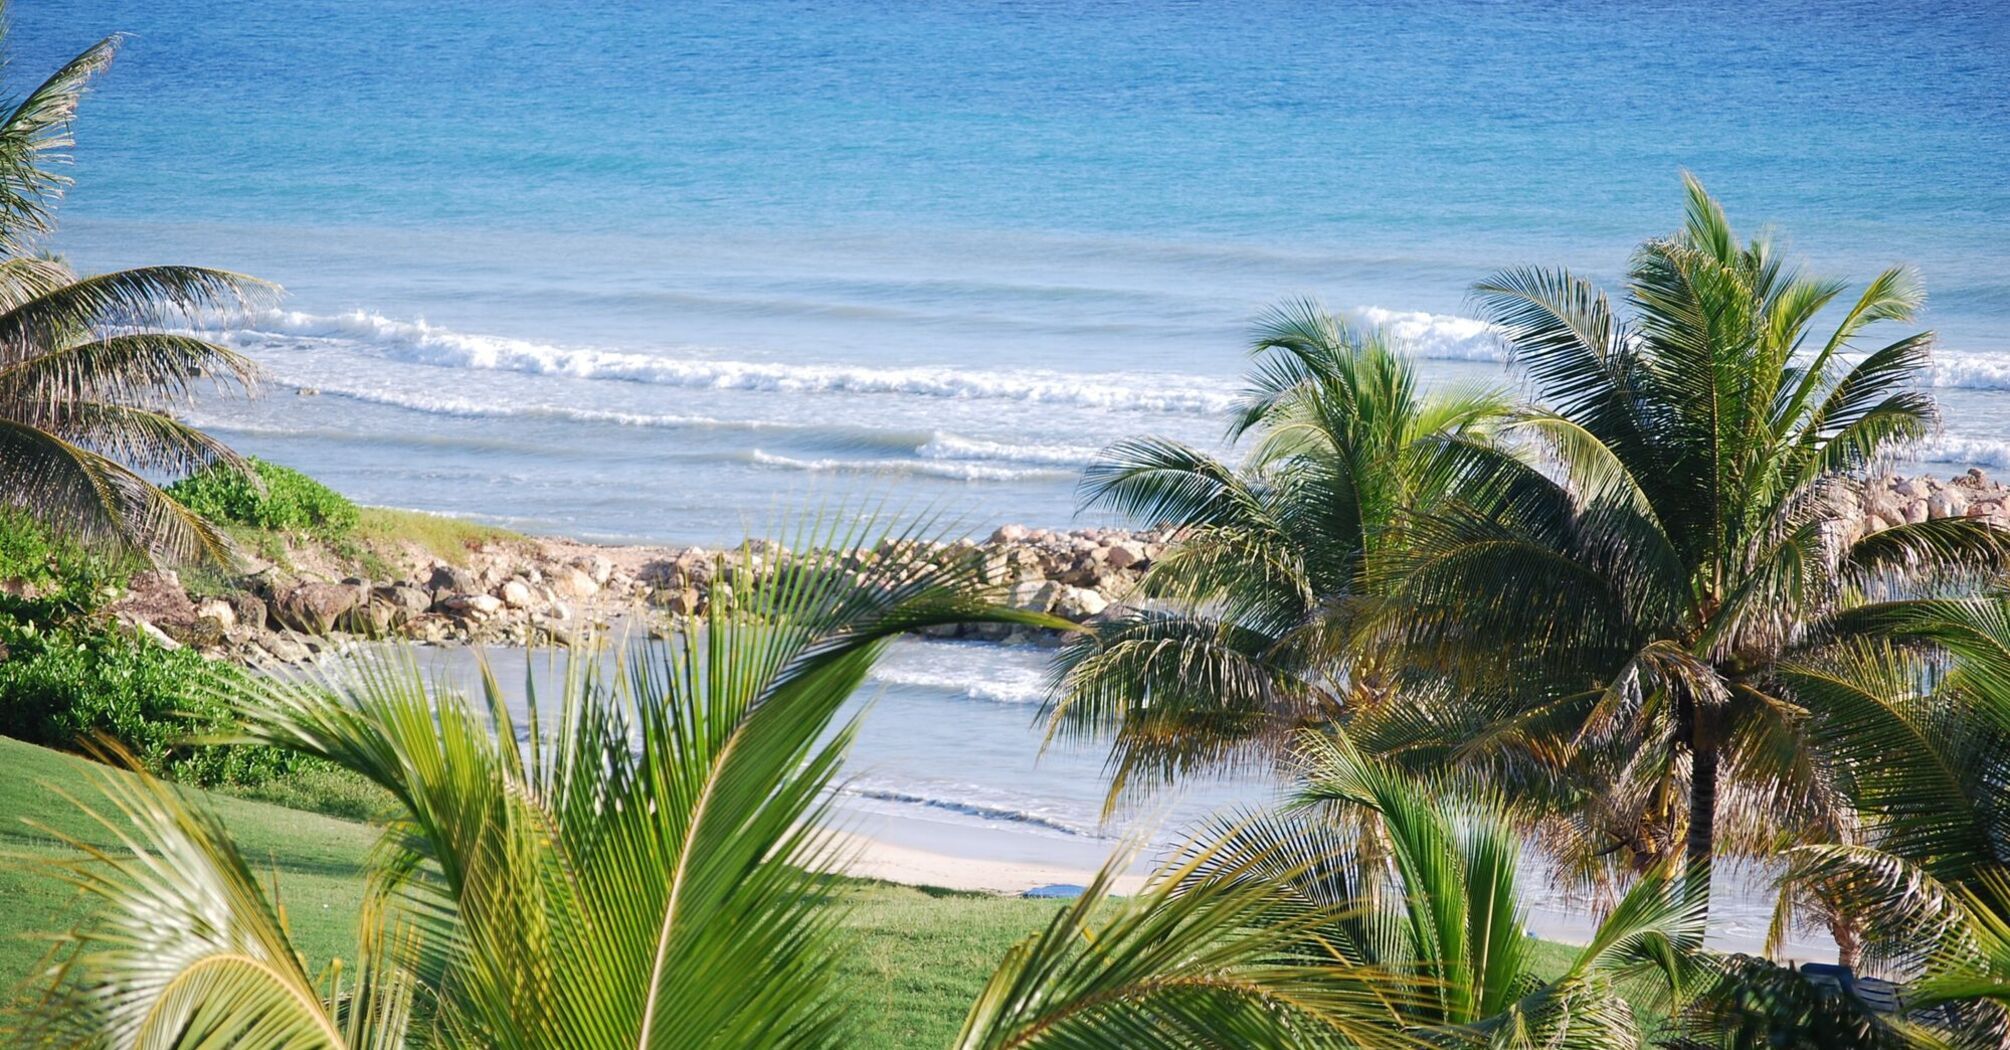 Tropical beach view in Jamaica with palm trees in the foreground and the Caribbean Sea in the background